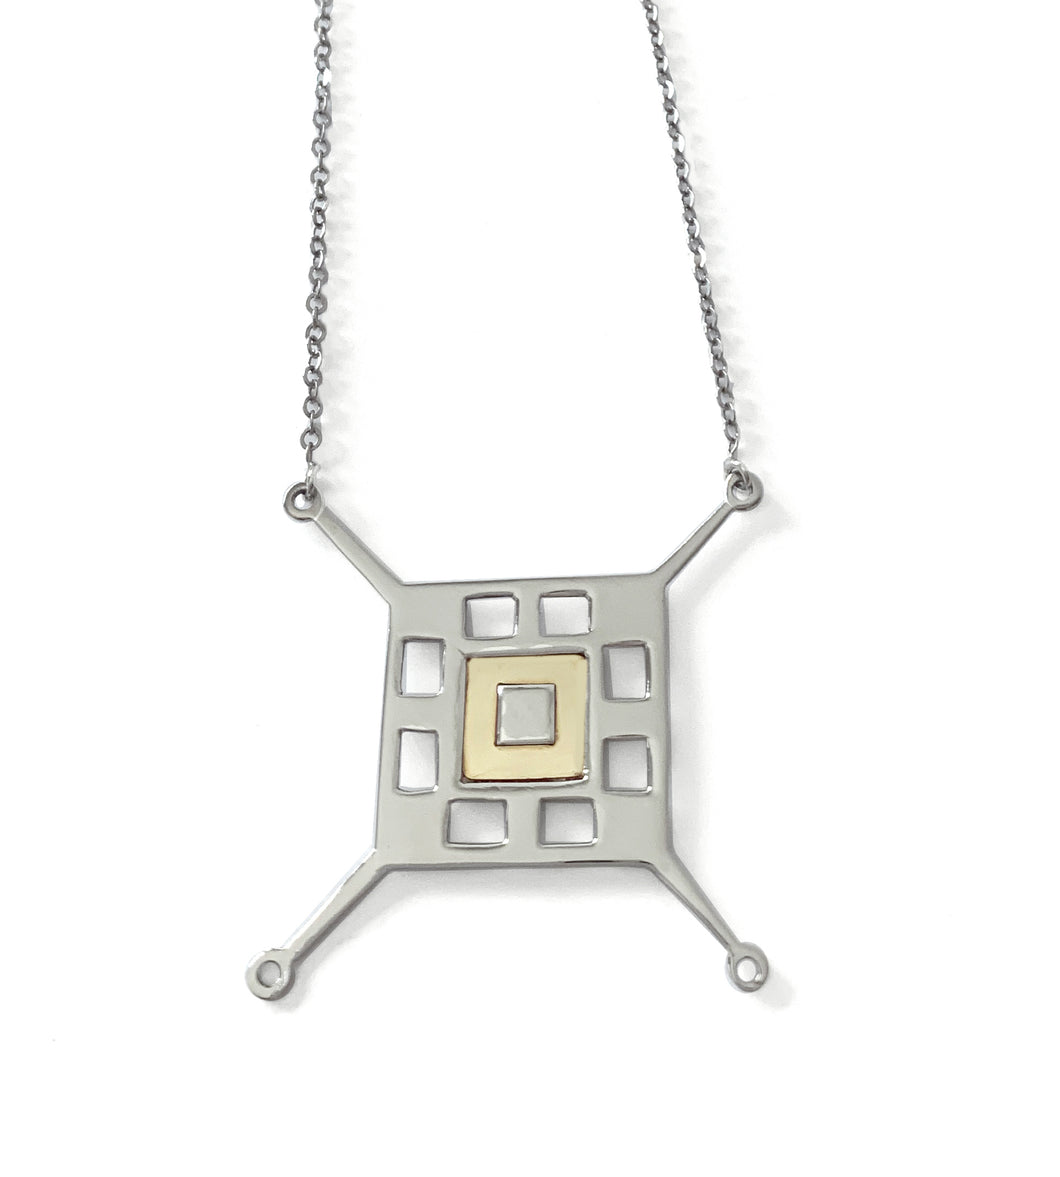 Silver & yellow gold plated square necklace